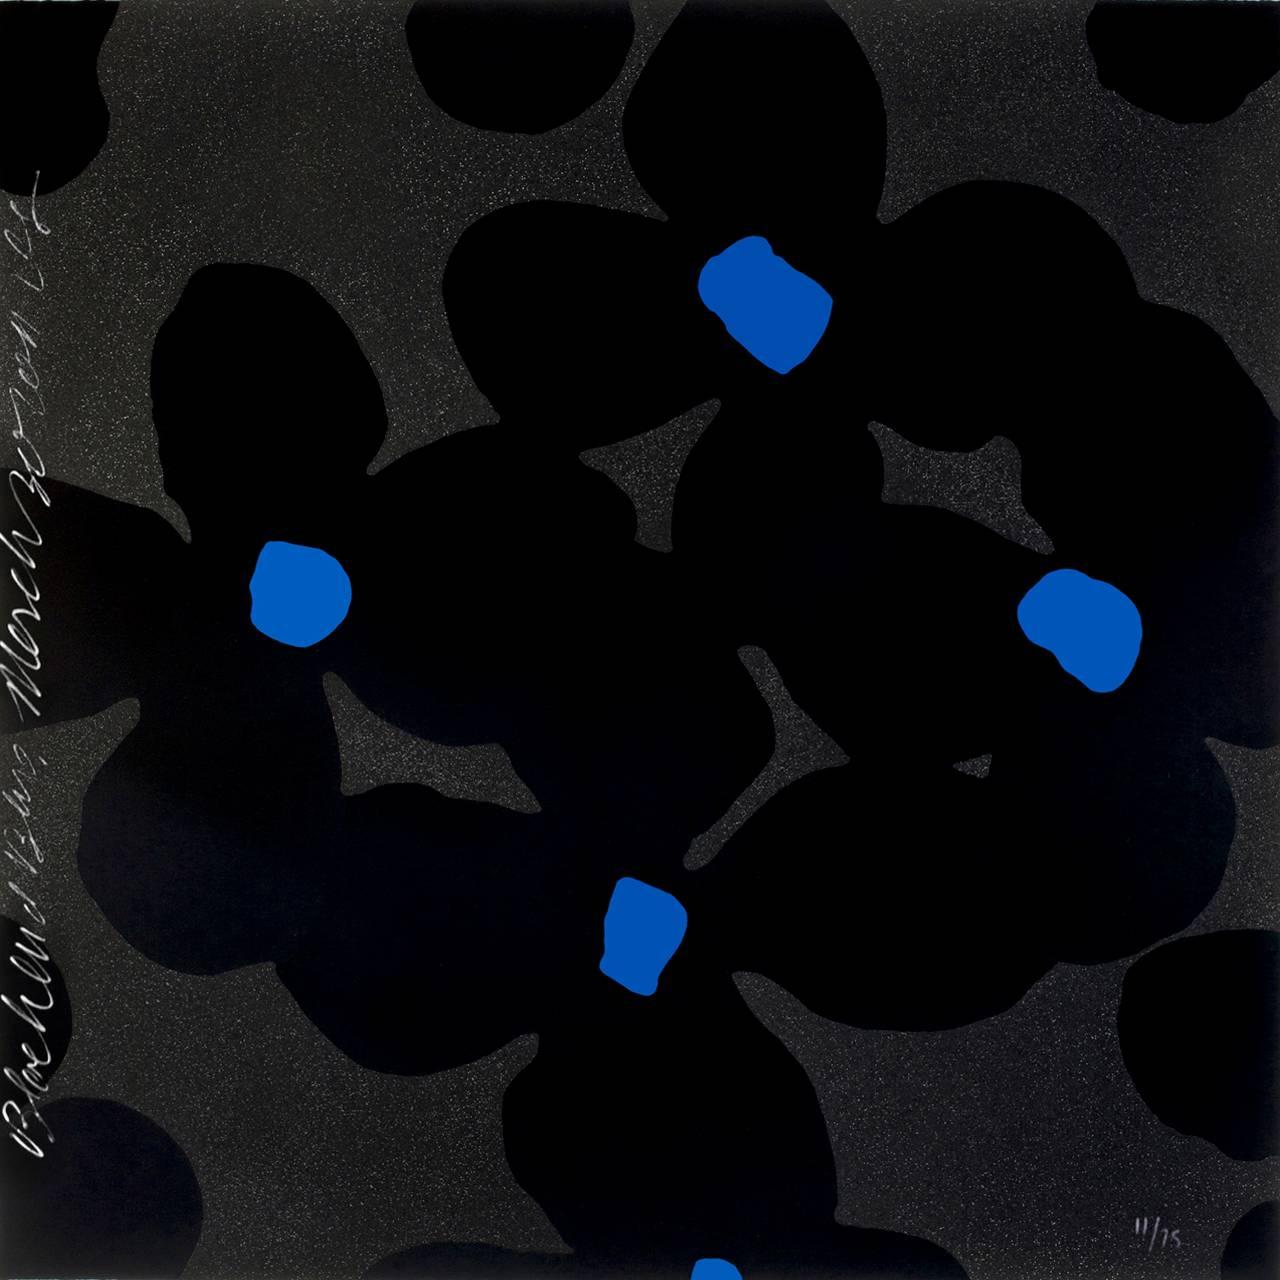 Donald Sultan
Black and Blues, 2011
Silkscreen with hand applied Silica on Saunders Waterford paper
38 x 38 inches
Edition of 75, signed